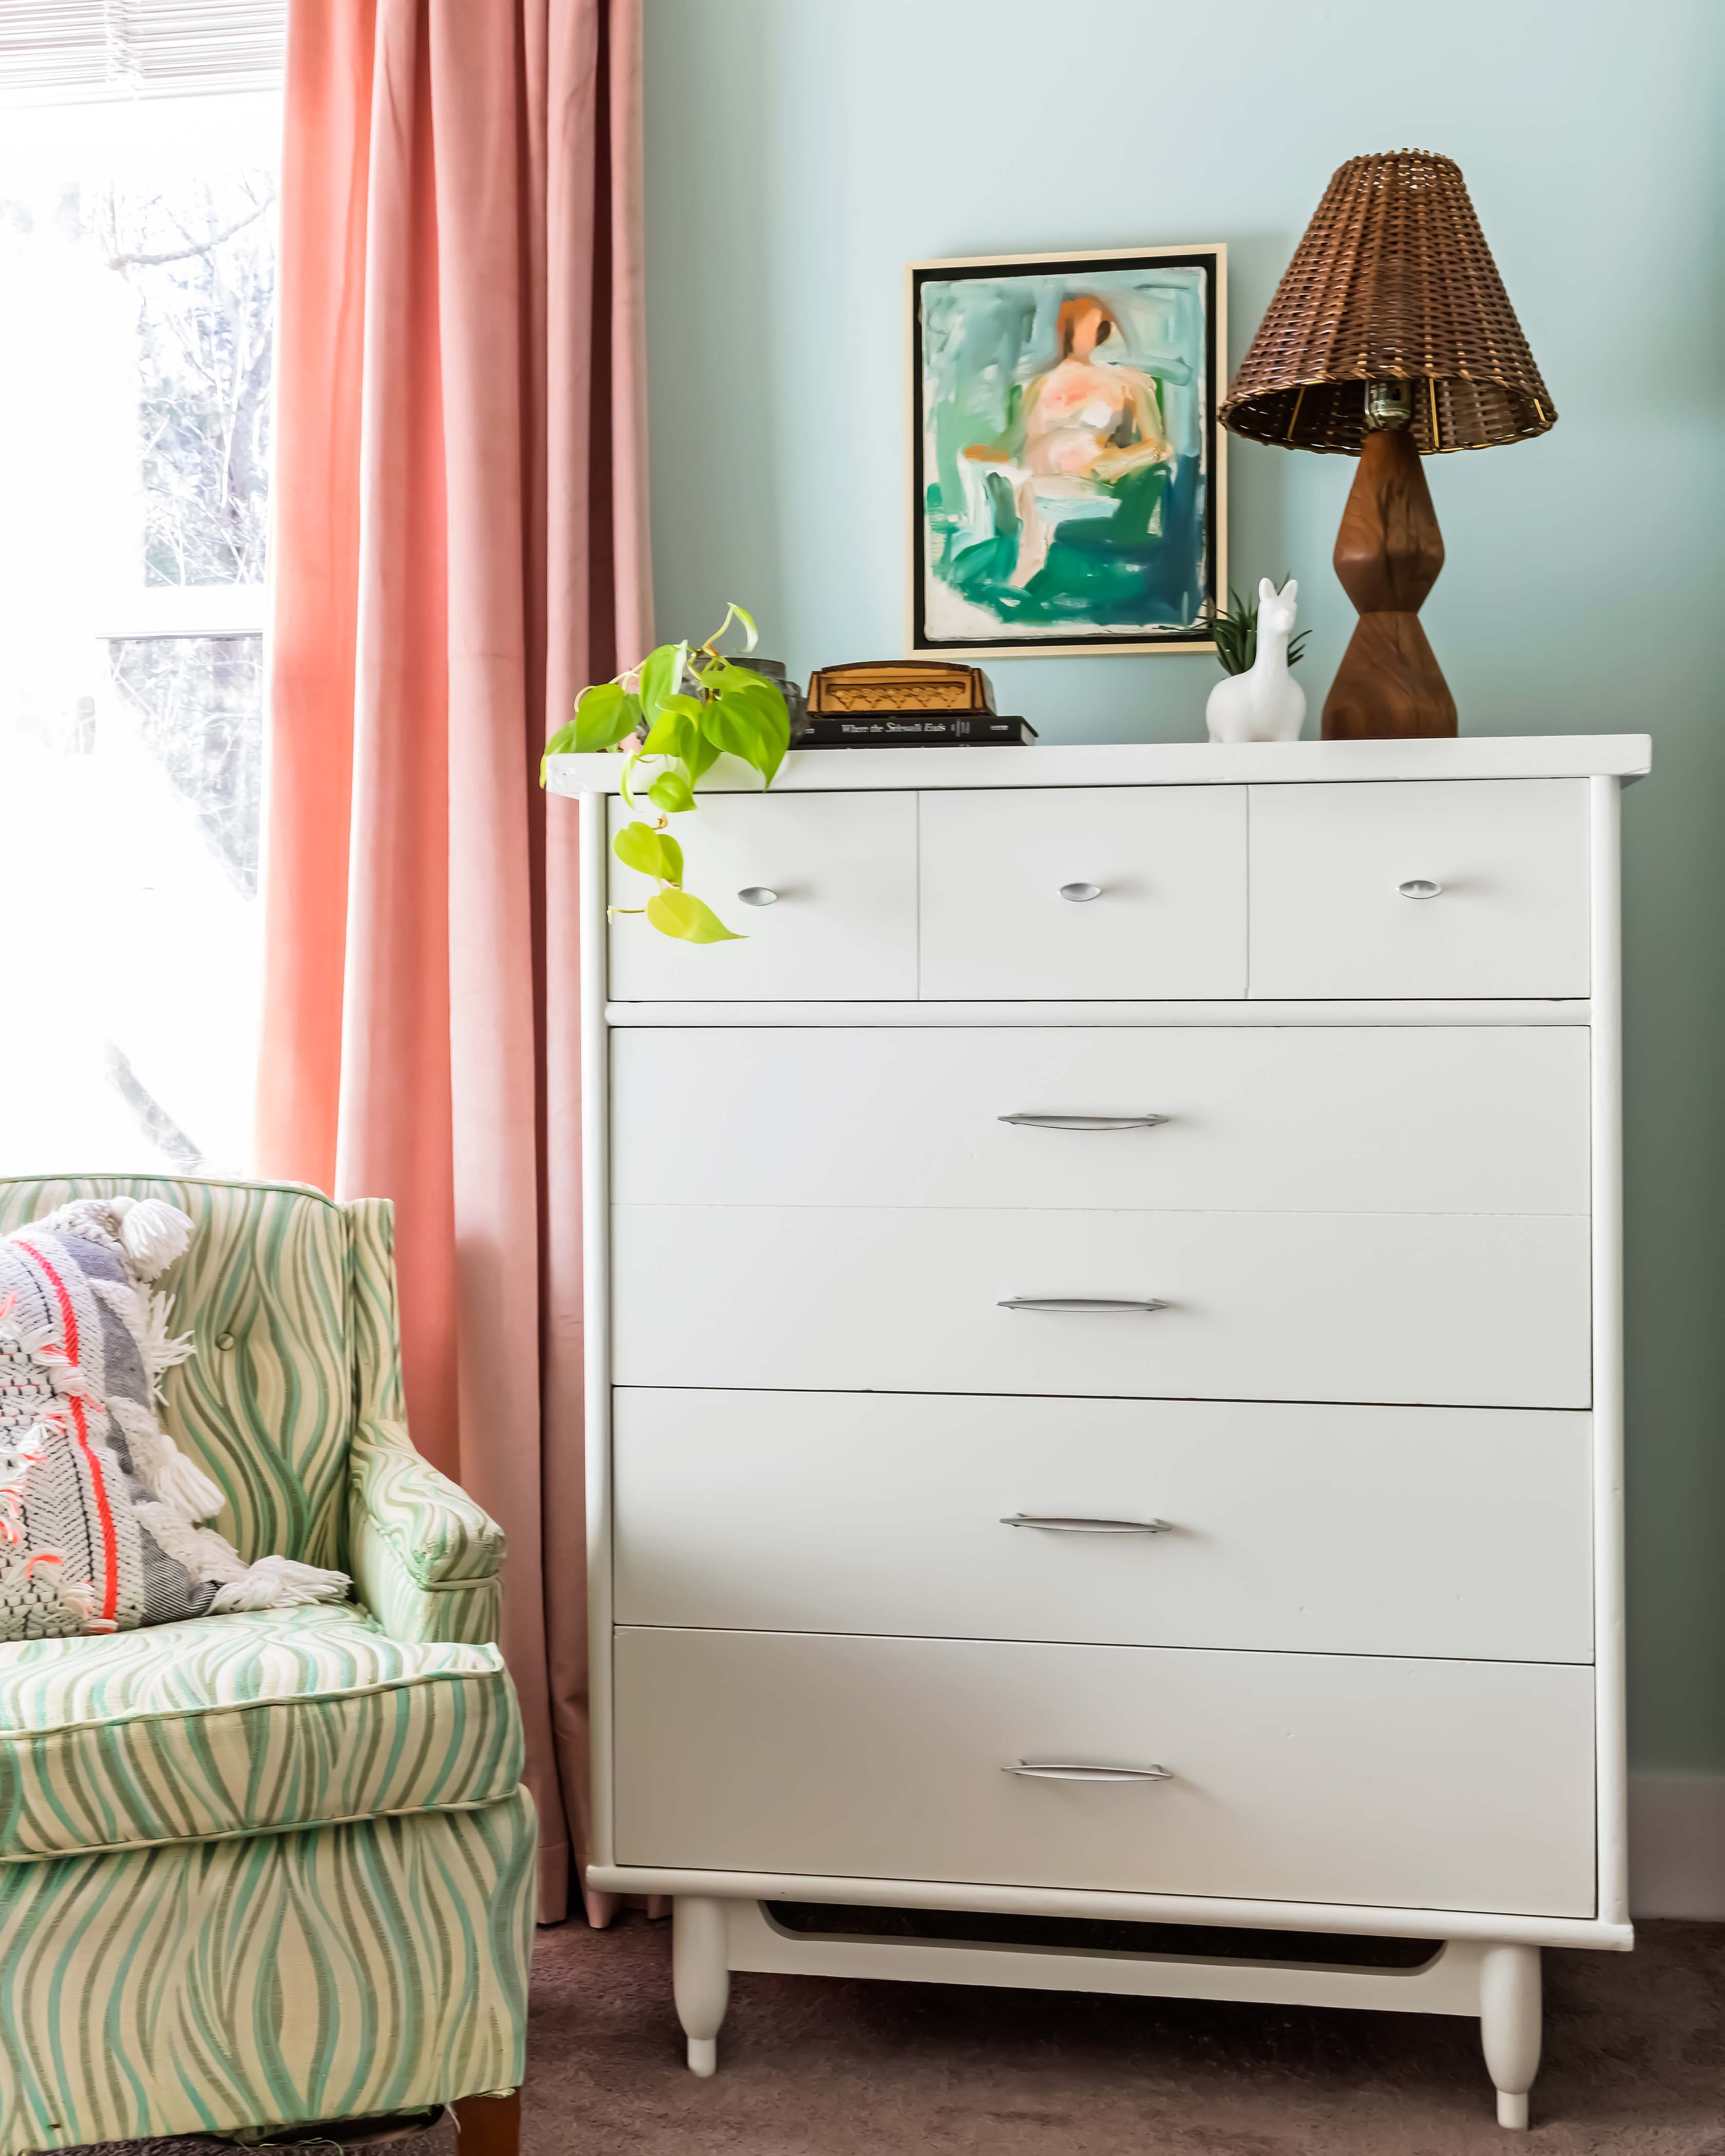 Painting a dresser in Classic, a light beige, instantly refreshes the look.